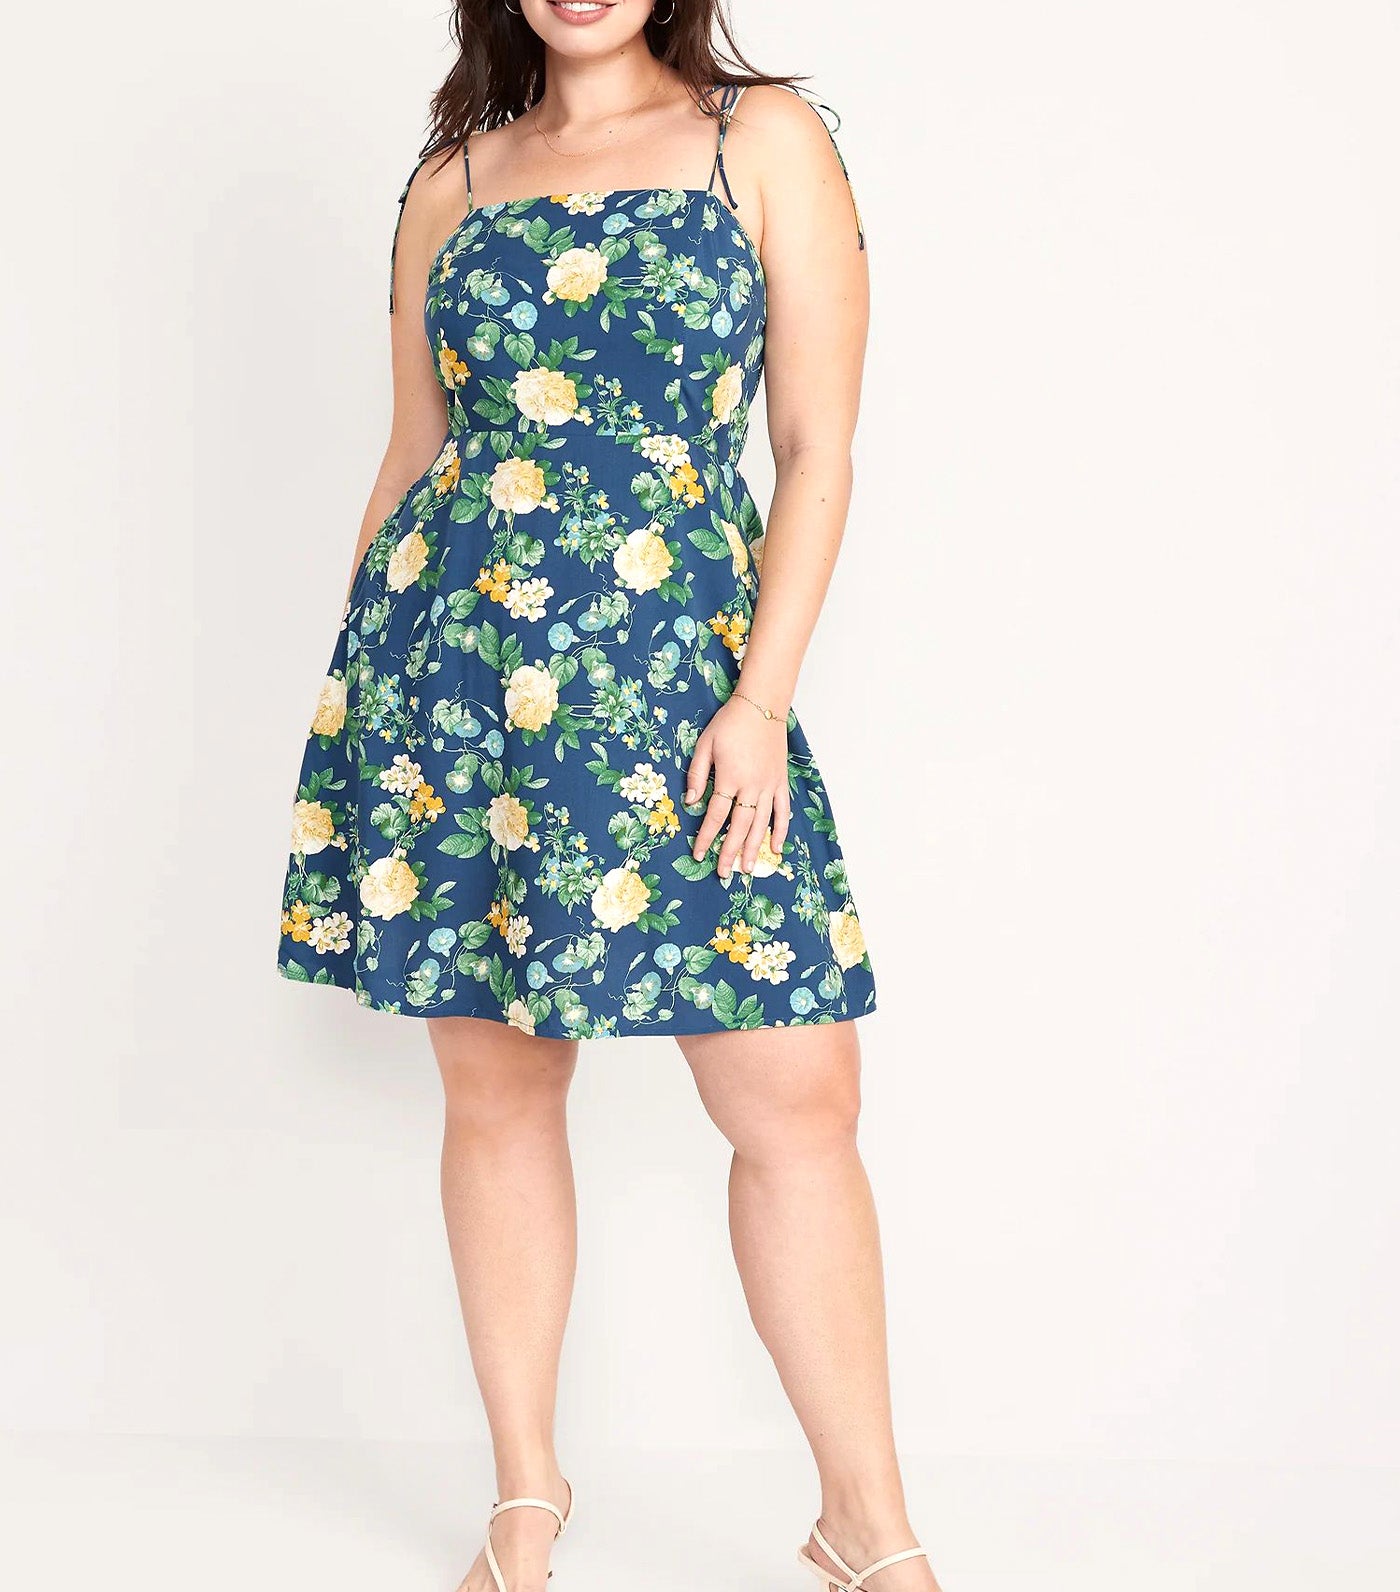 Fit & Flare Matching Tie-Strap Mini Dress for Women Navy Floral